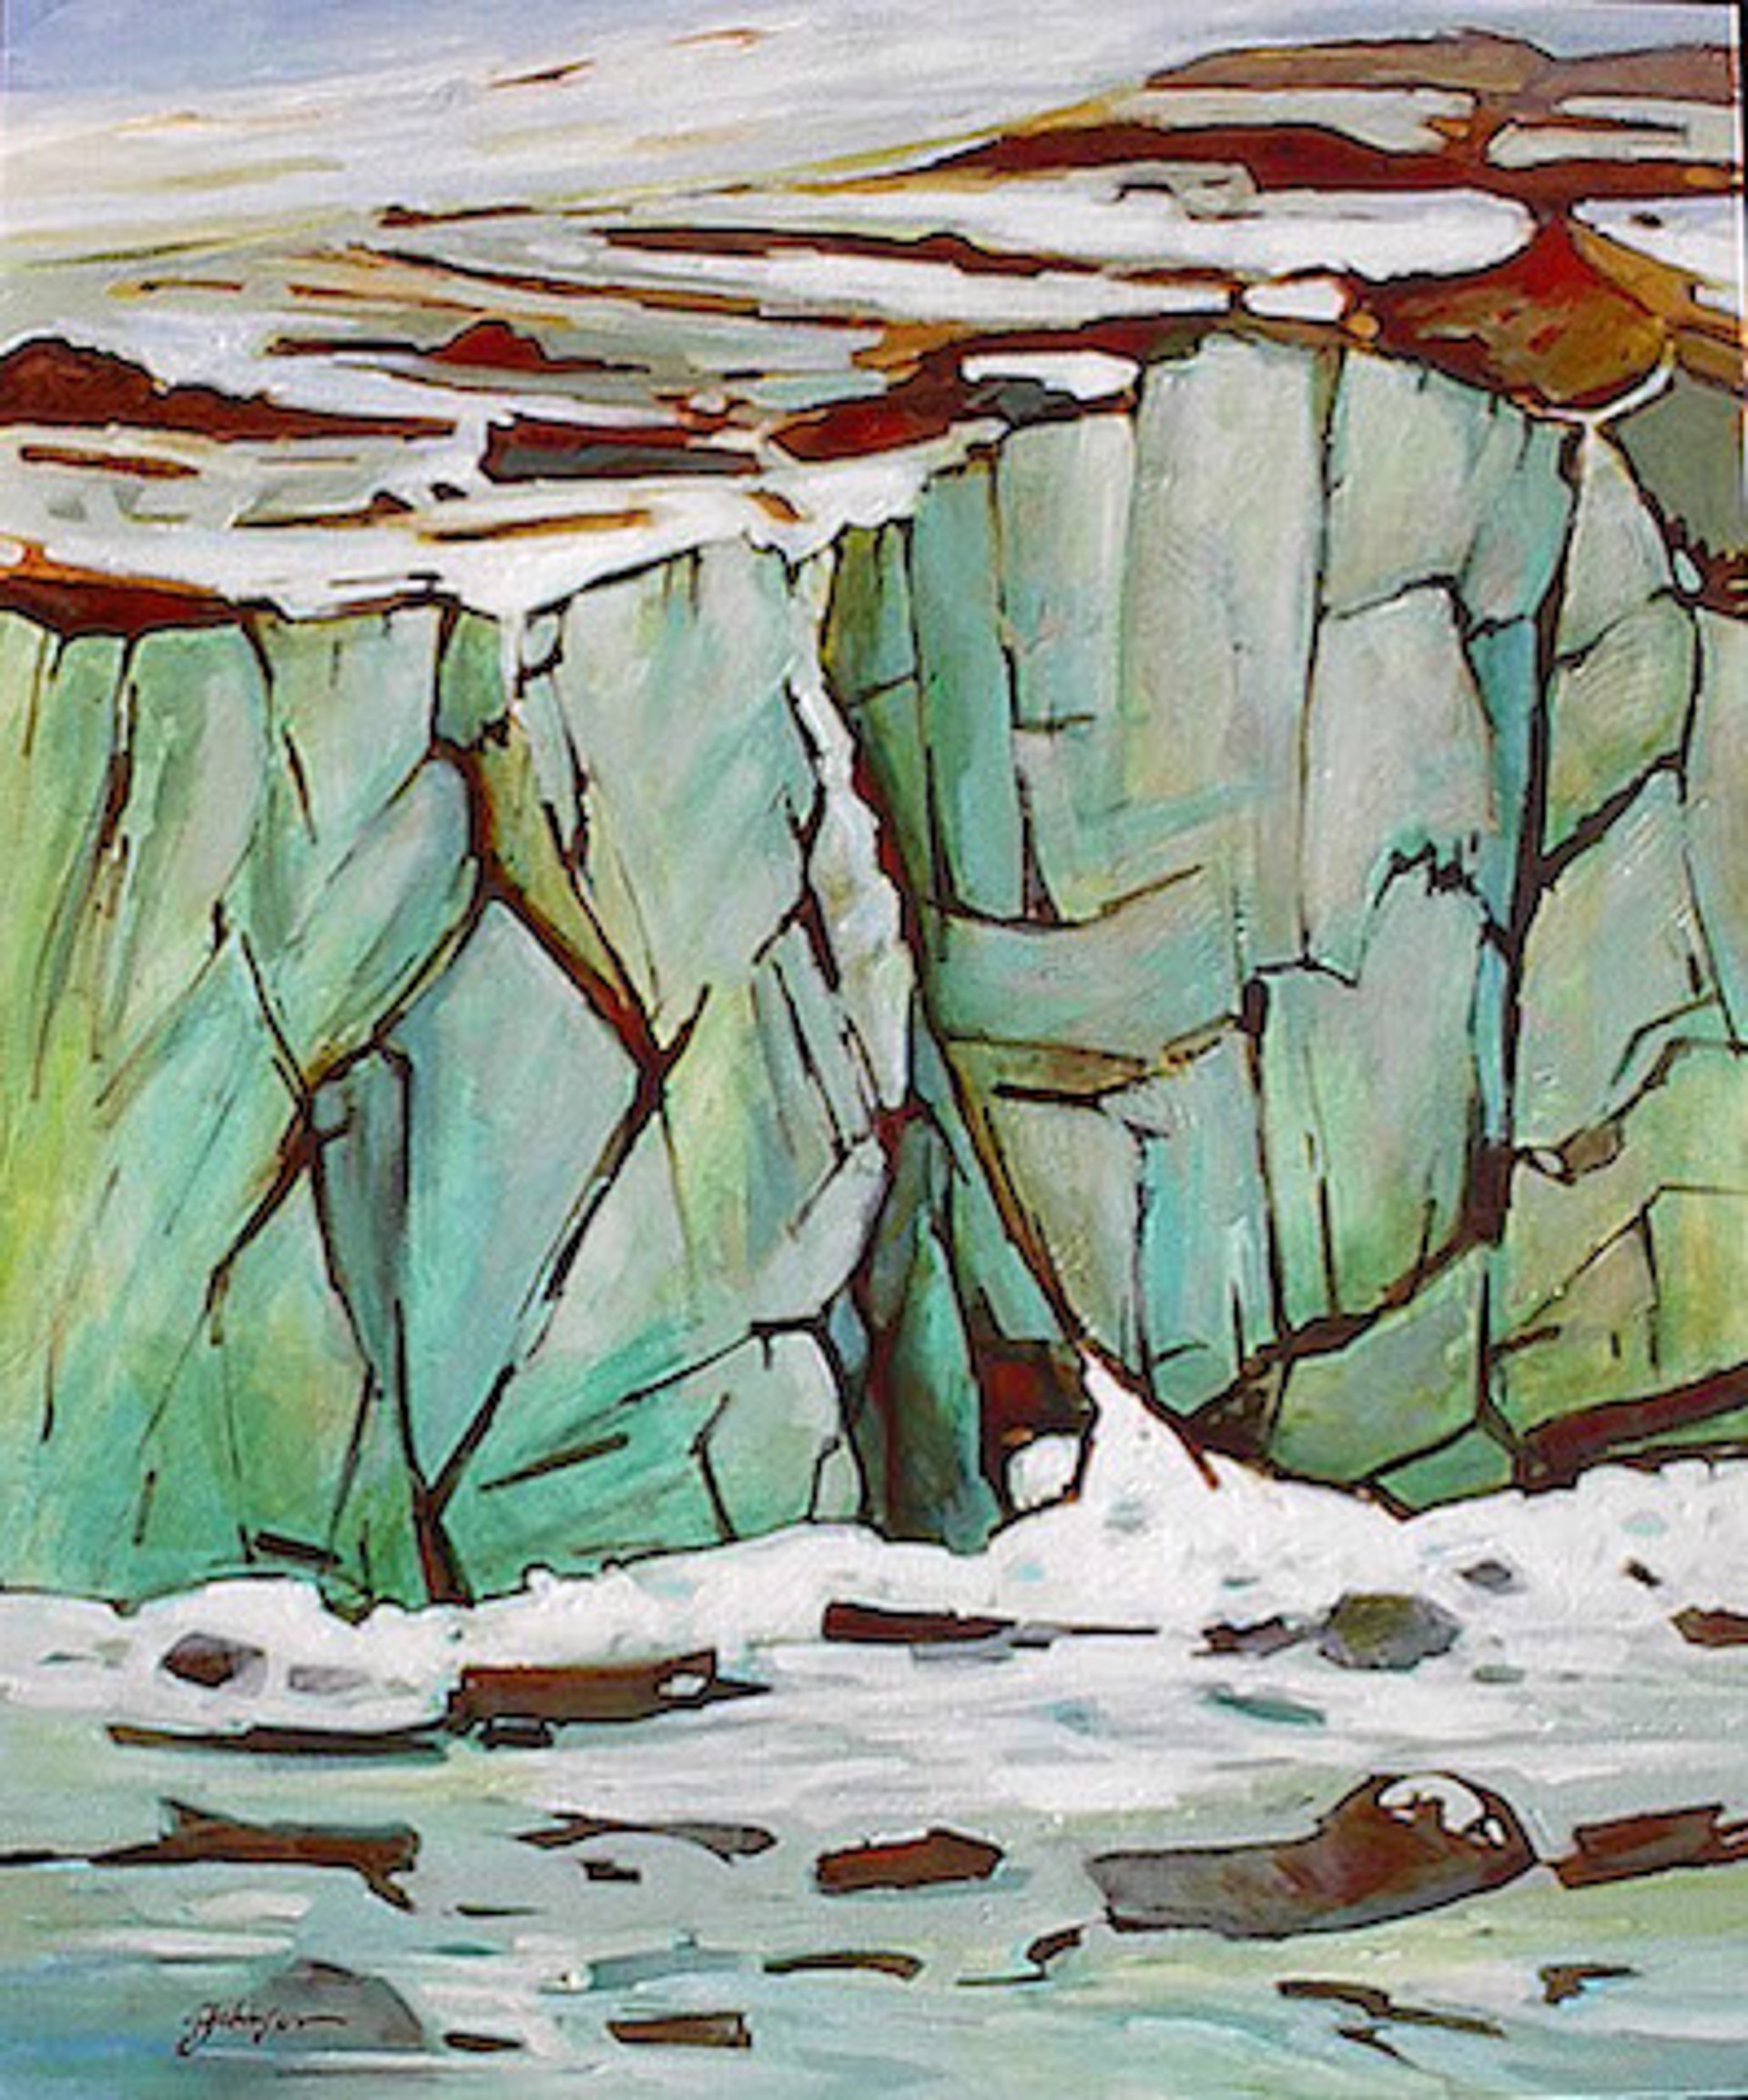 Angel Glacier at Cavell Pond - Commission by Gail Johnson